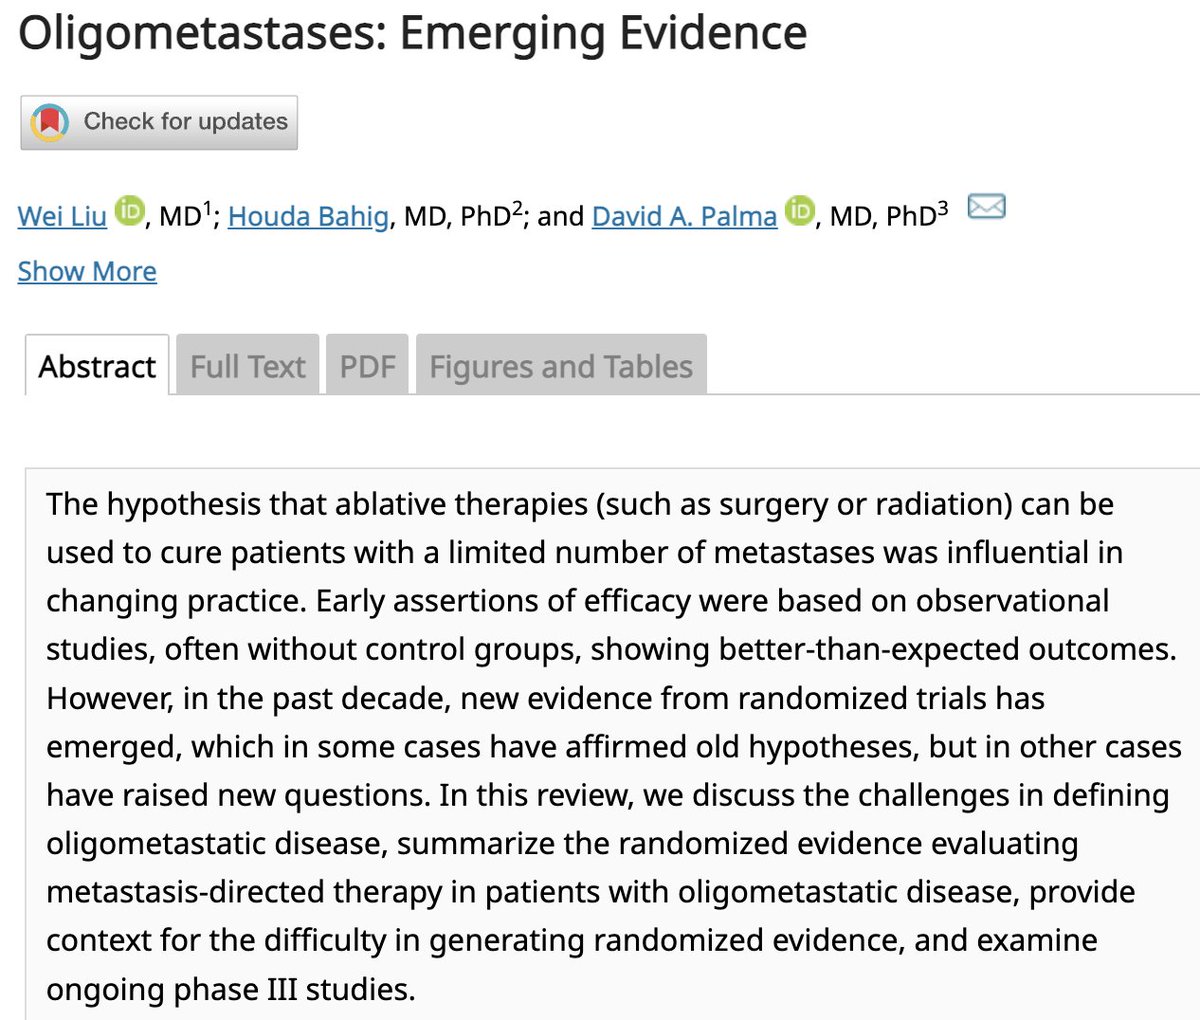 Happy to share our thoughts in the JCO on the randomized evidence on oligometastases, challenges in producing randomized evidence in this space, and ongoing phase III trials. @drdavidpalma @HoudaBahig ascopubs.org/doi/abs/10.120…